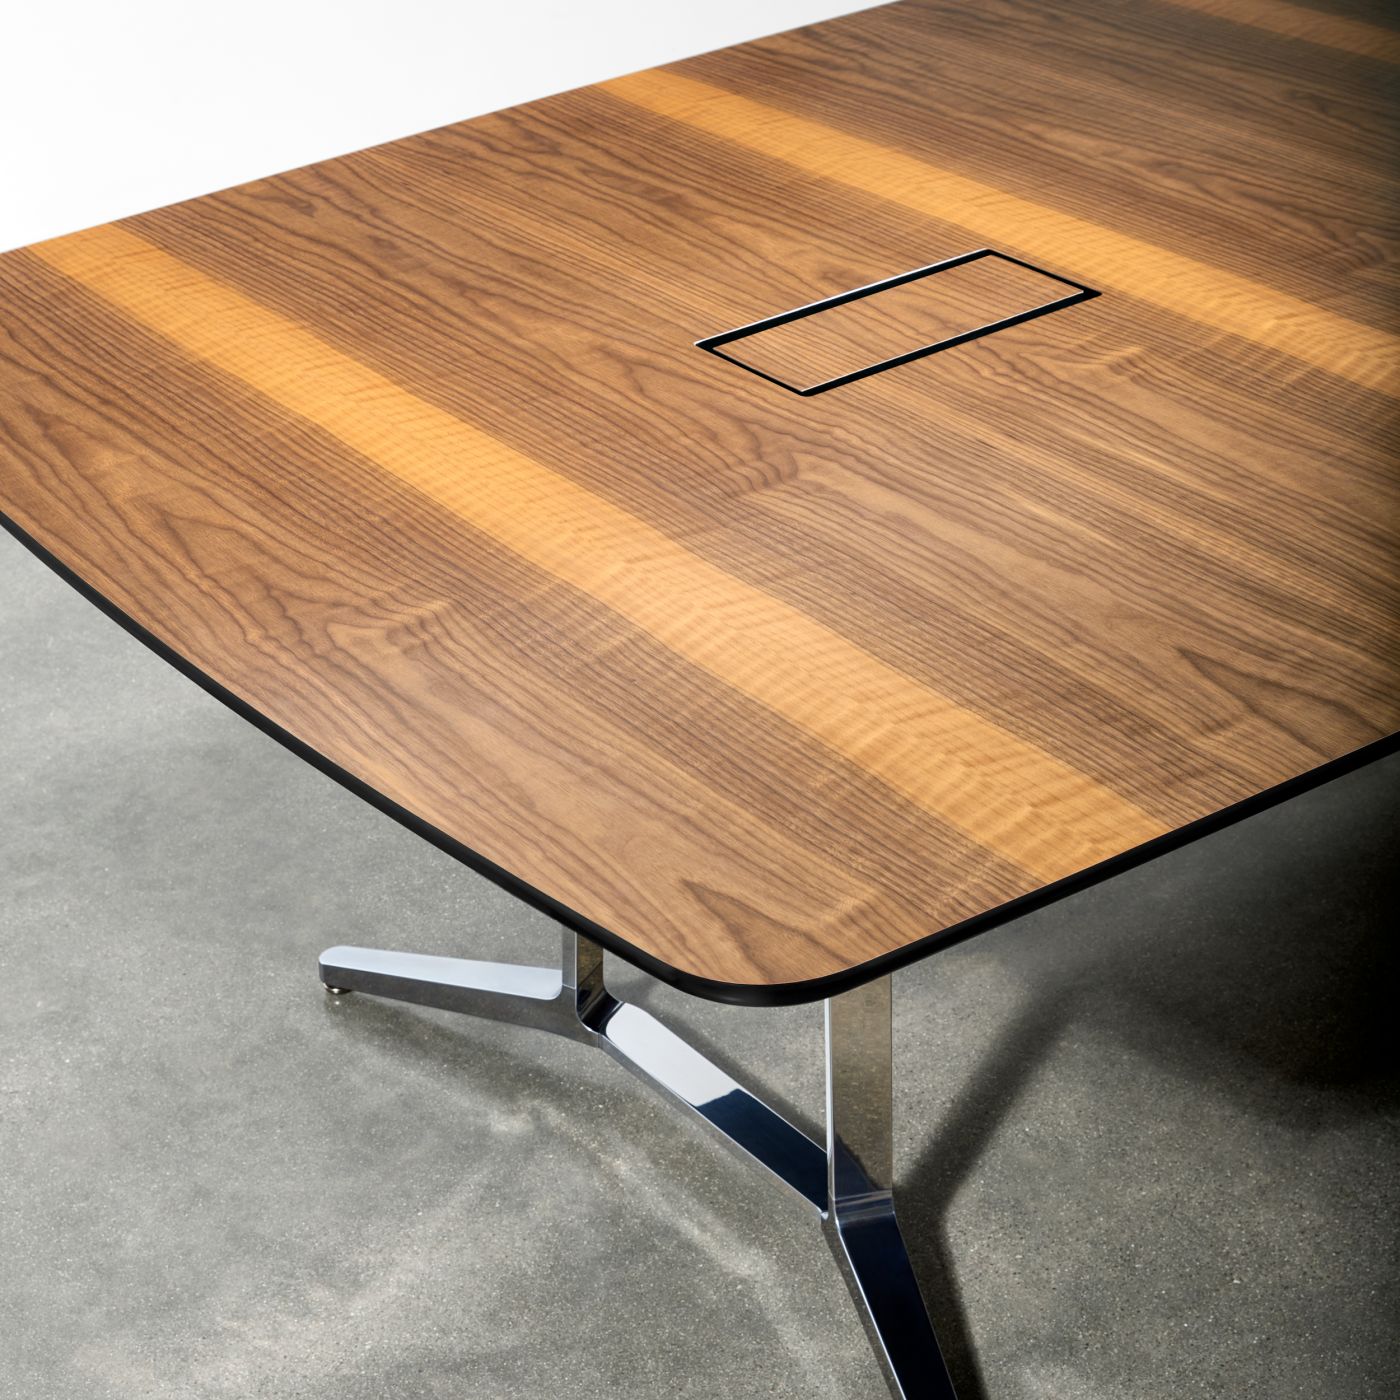 Power/data access doors are perfectly grain-matched to the table surface.